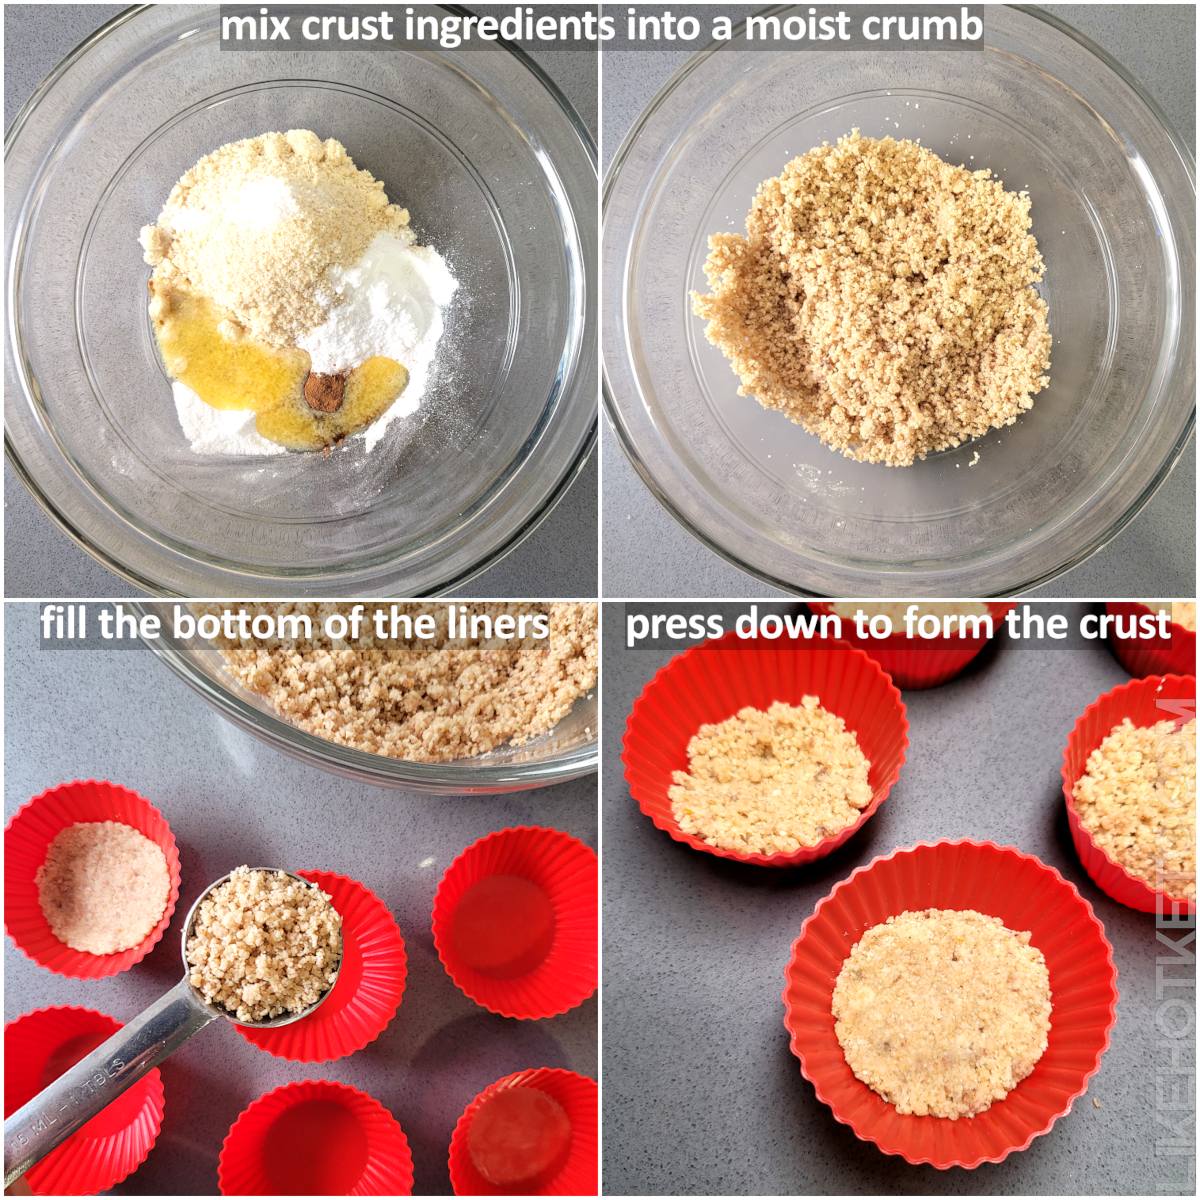 Step by step collage of how to make the keto mini pumpkin pie crust: mixing ingredients, texture of the crumb, and filling the muffin liners.